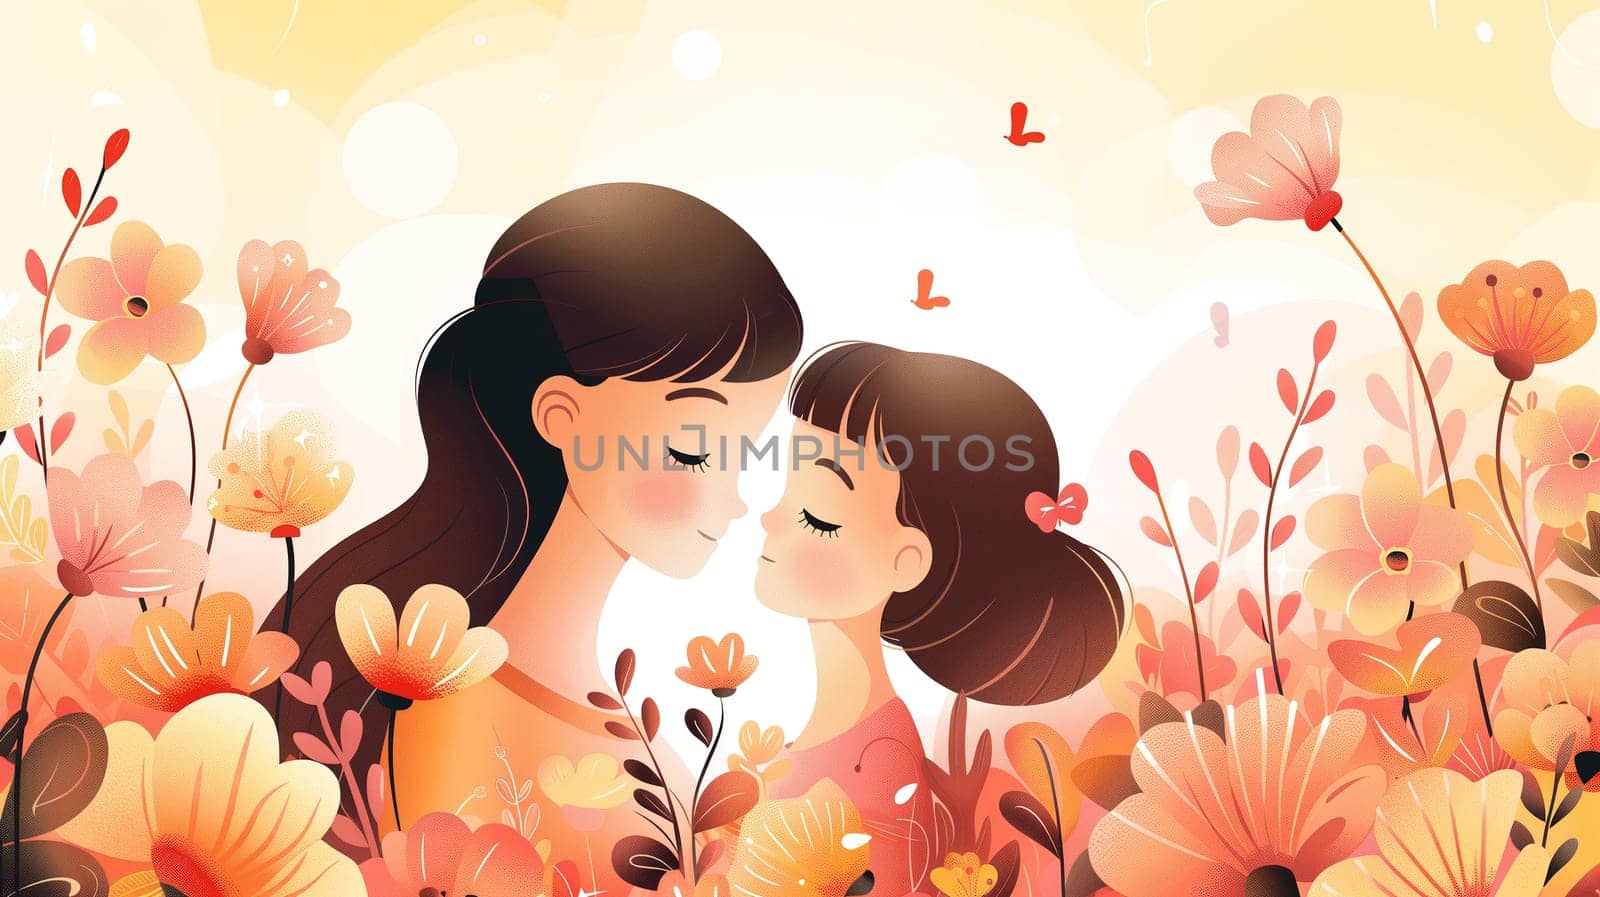 A mother and her daughter are standing together in a field filled with colorful flowers, enjoying the beauty of nature around them. The two are sharing a special moment surrounded by the vibrant blooms.